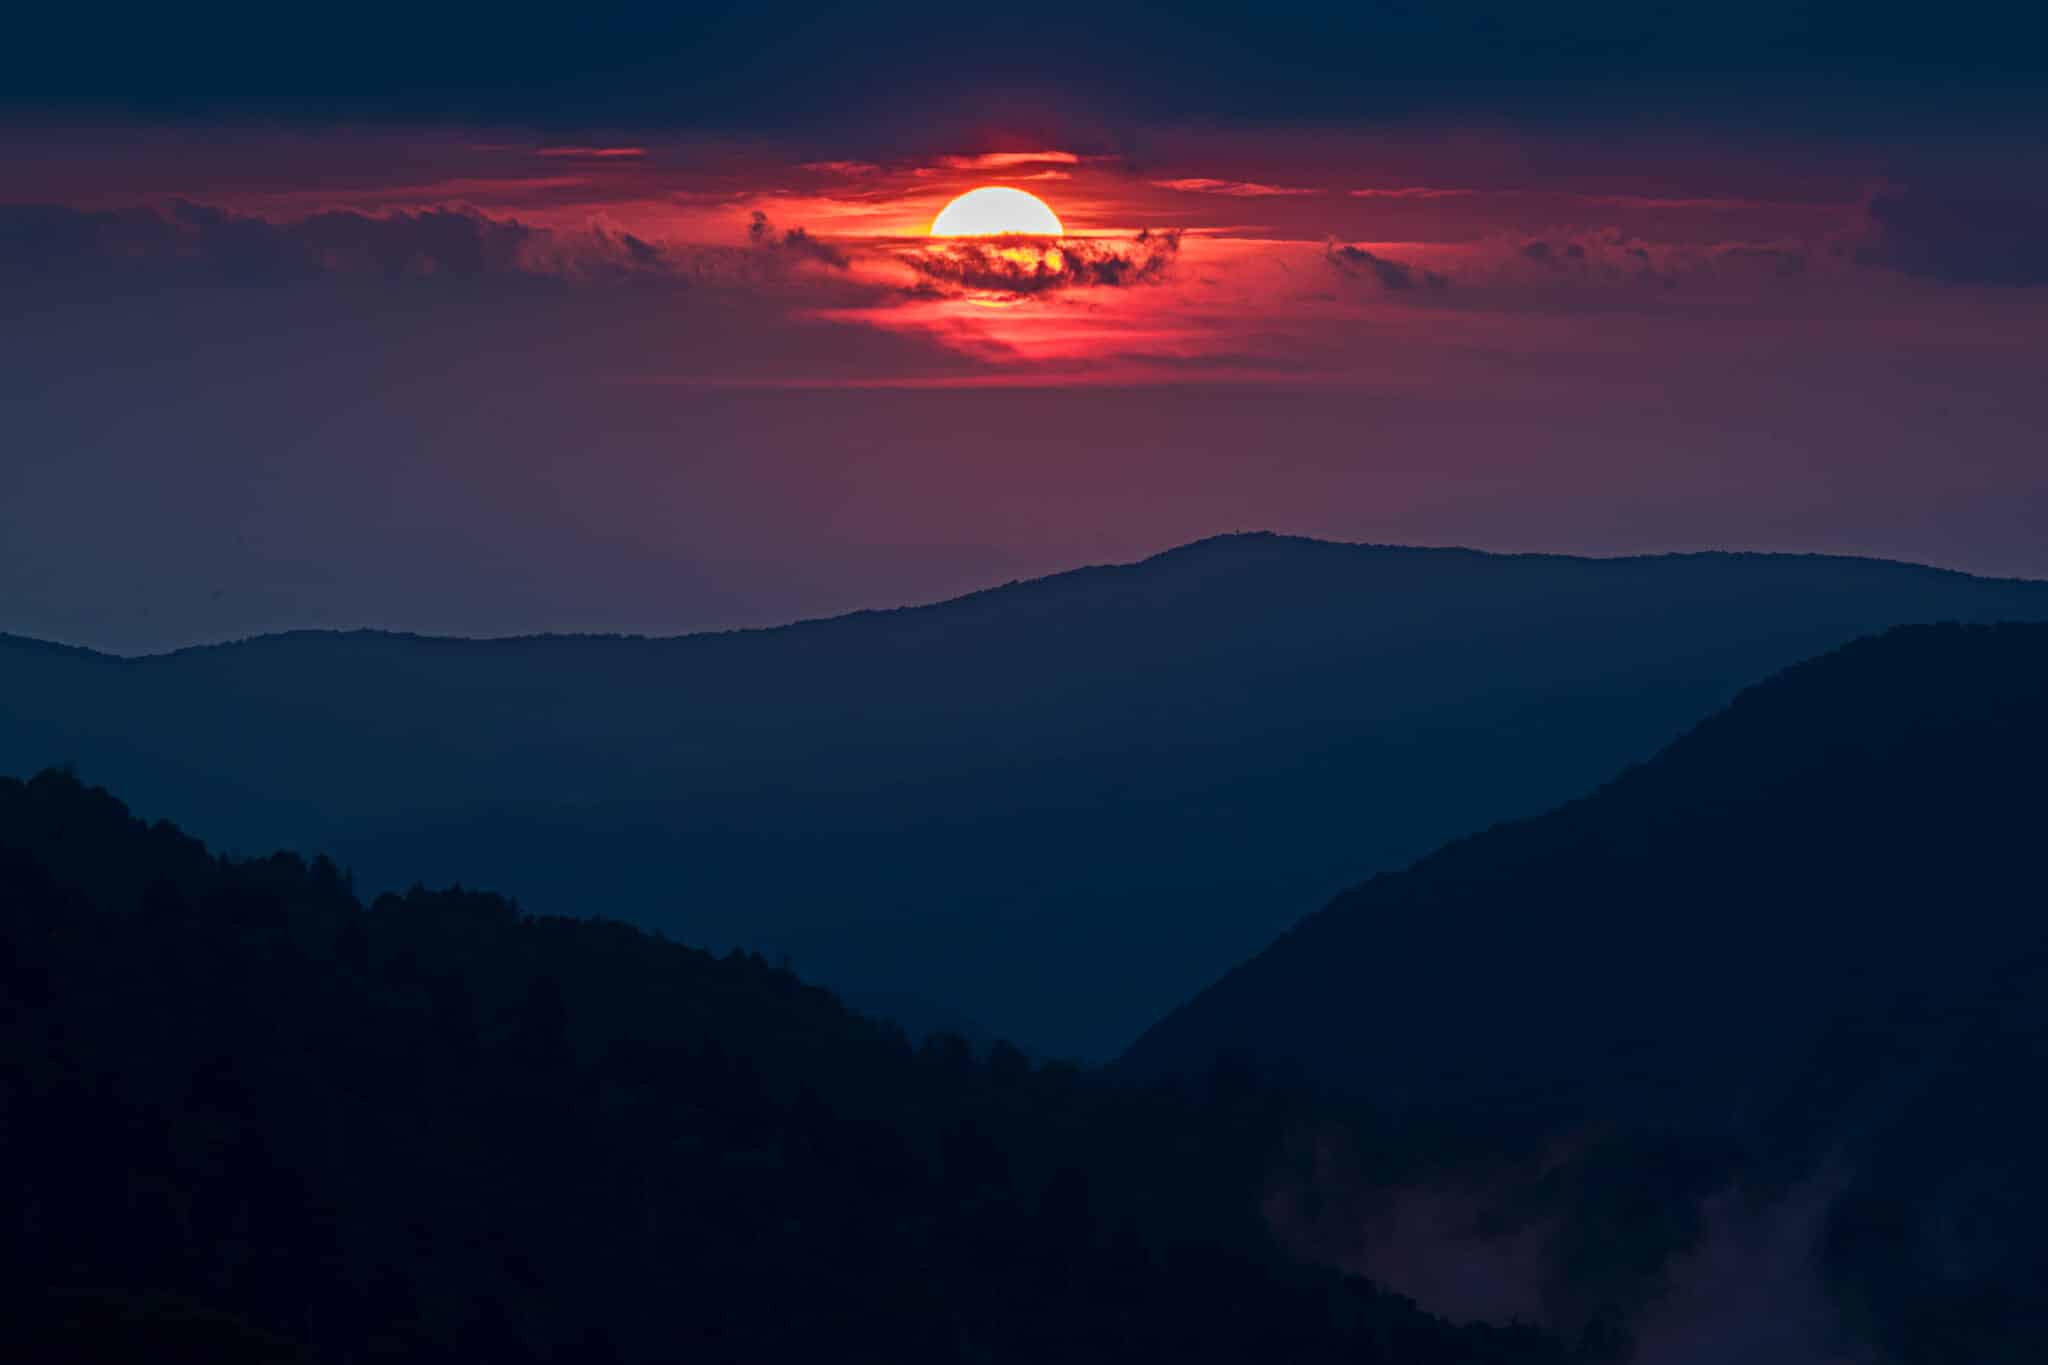 Sunset in the Great Smokey Mountains National Park